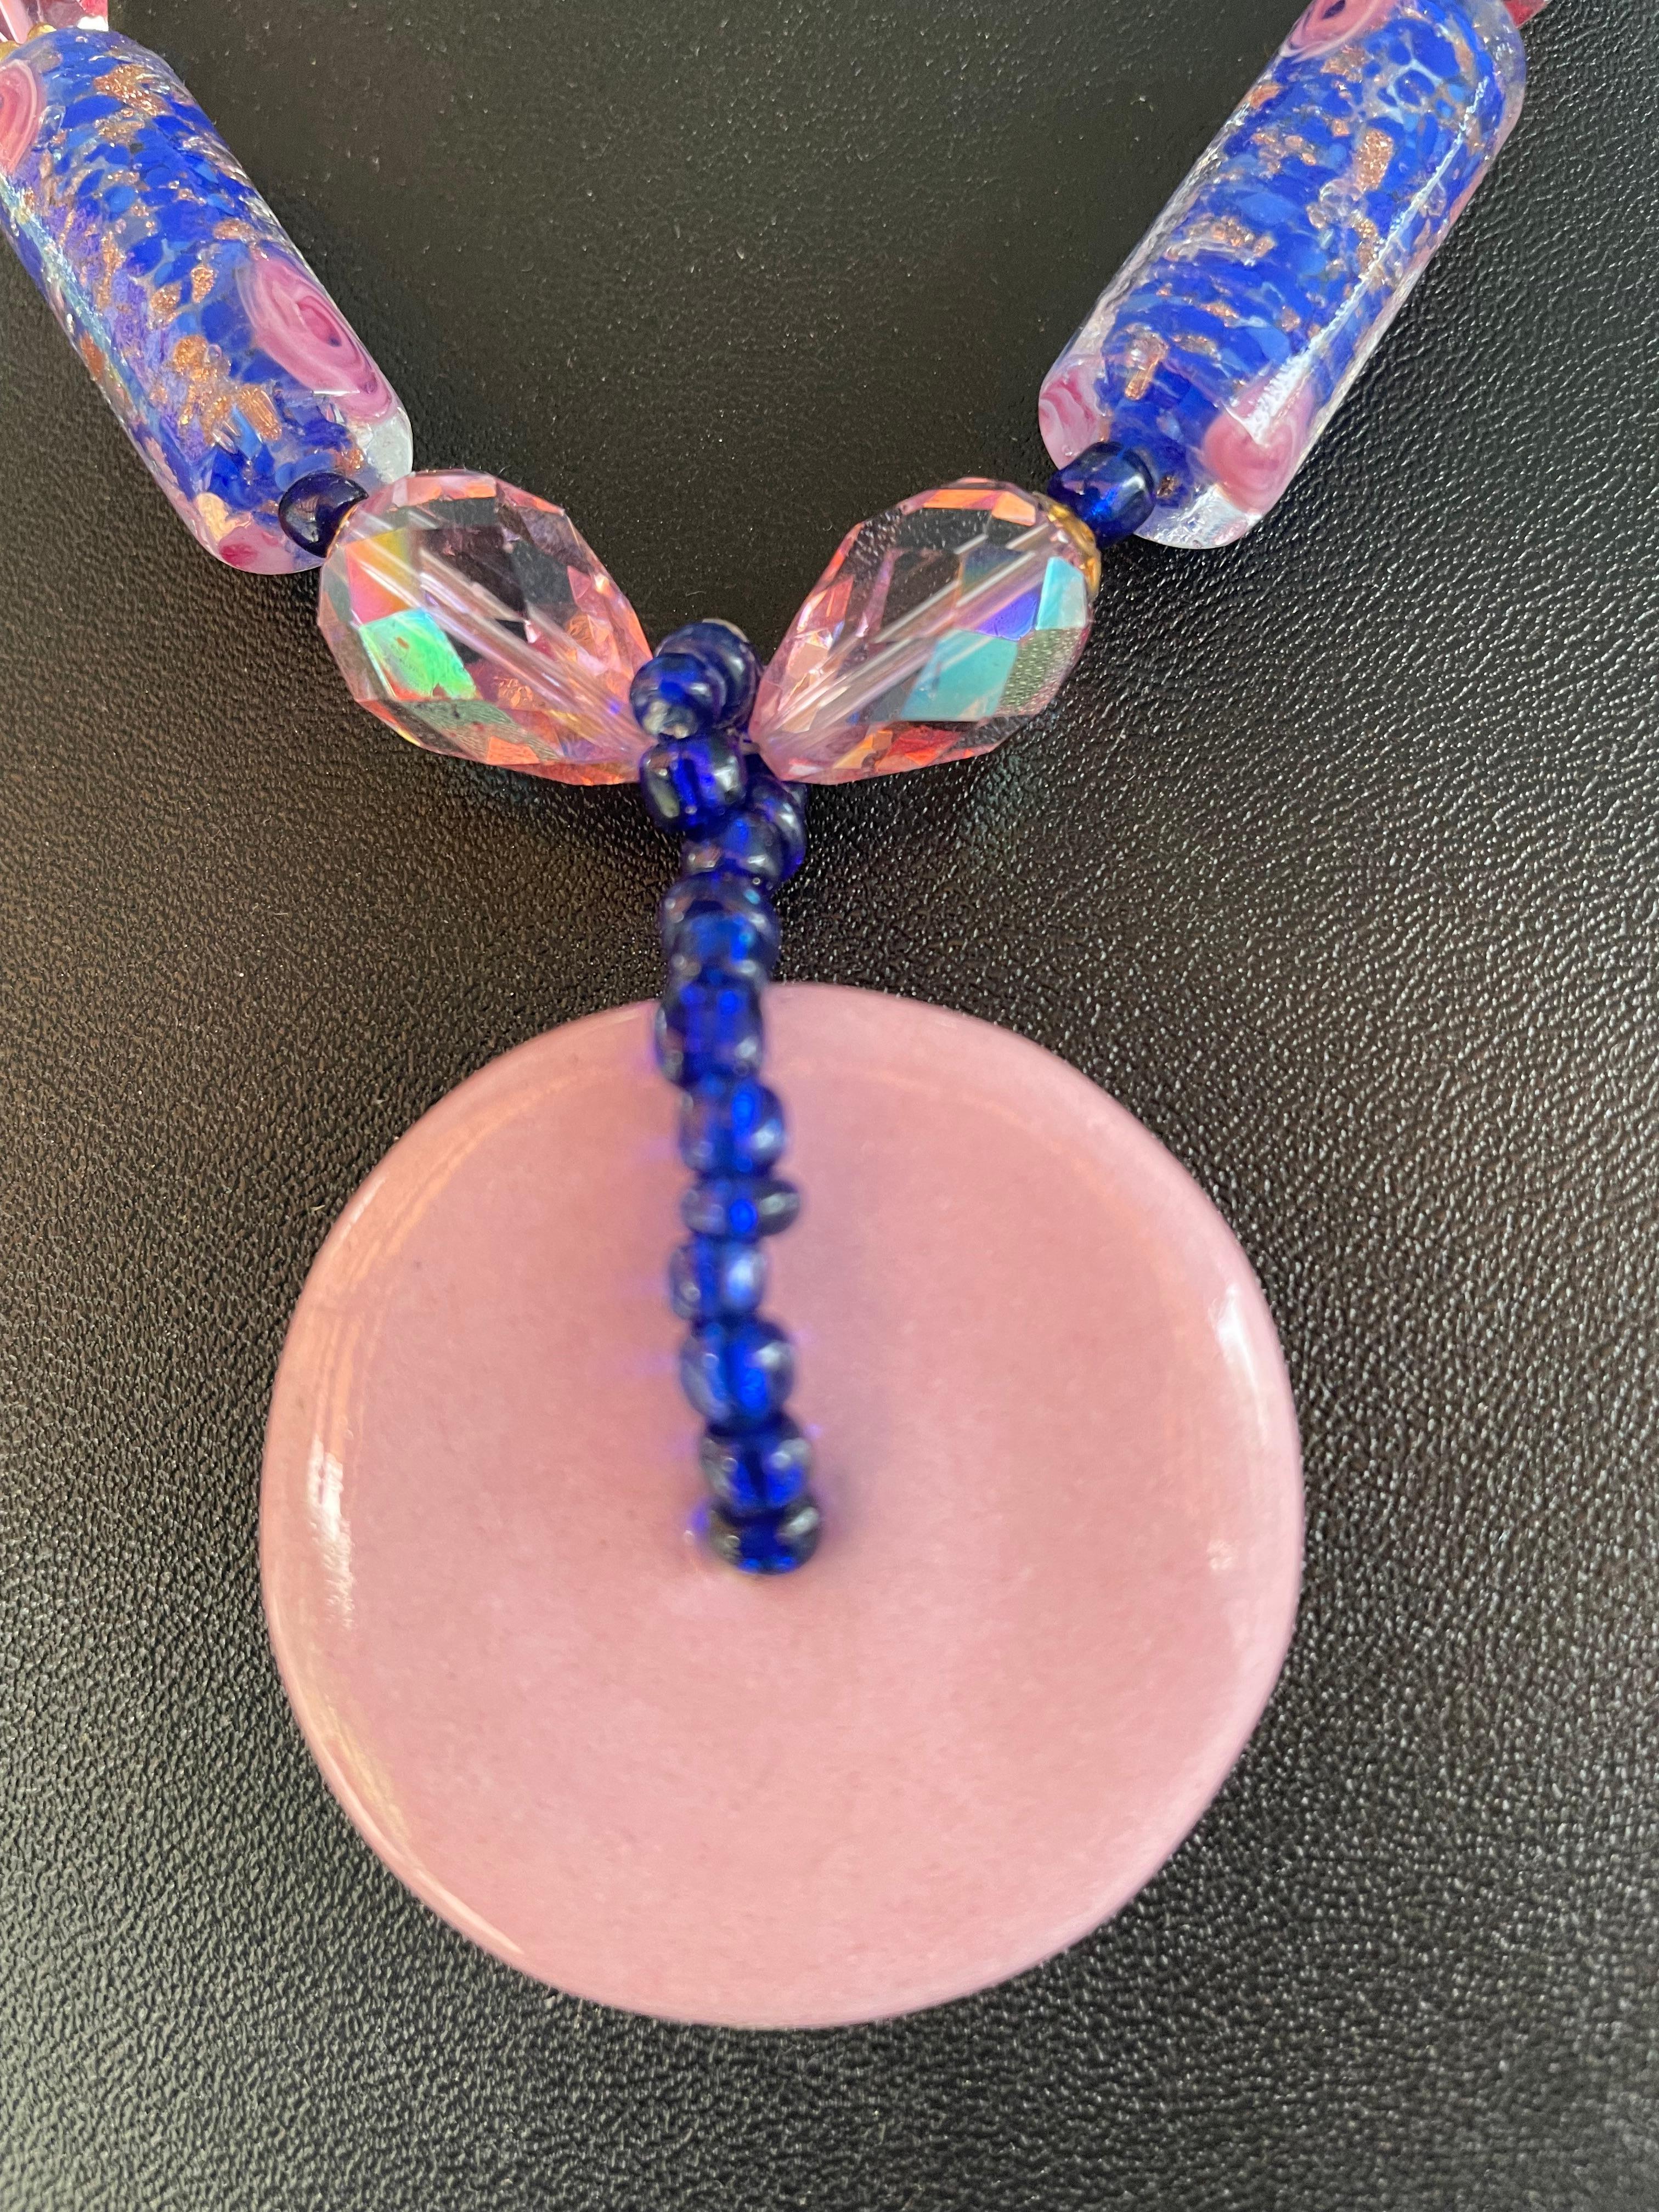 Vintage glazed pink Ceramic Disc, Vintage blue and pink cased glass Venetian beads,rose quartz, and gold crystal bicone beads comprise this lovely necklace.These Venetian beads are from the island of Murano and are a gorgeous example of the cased